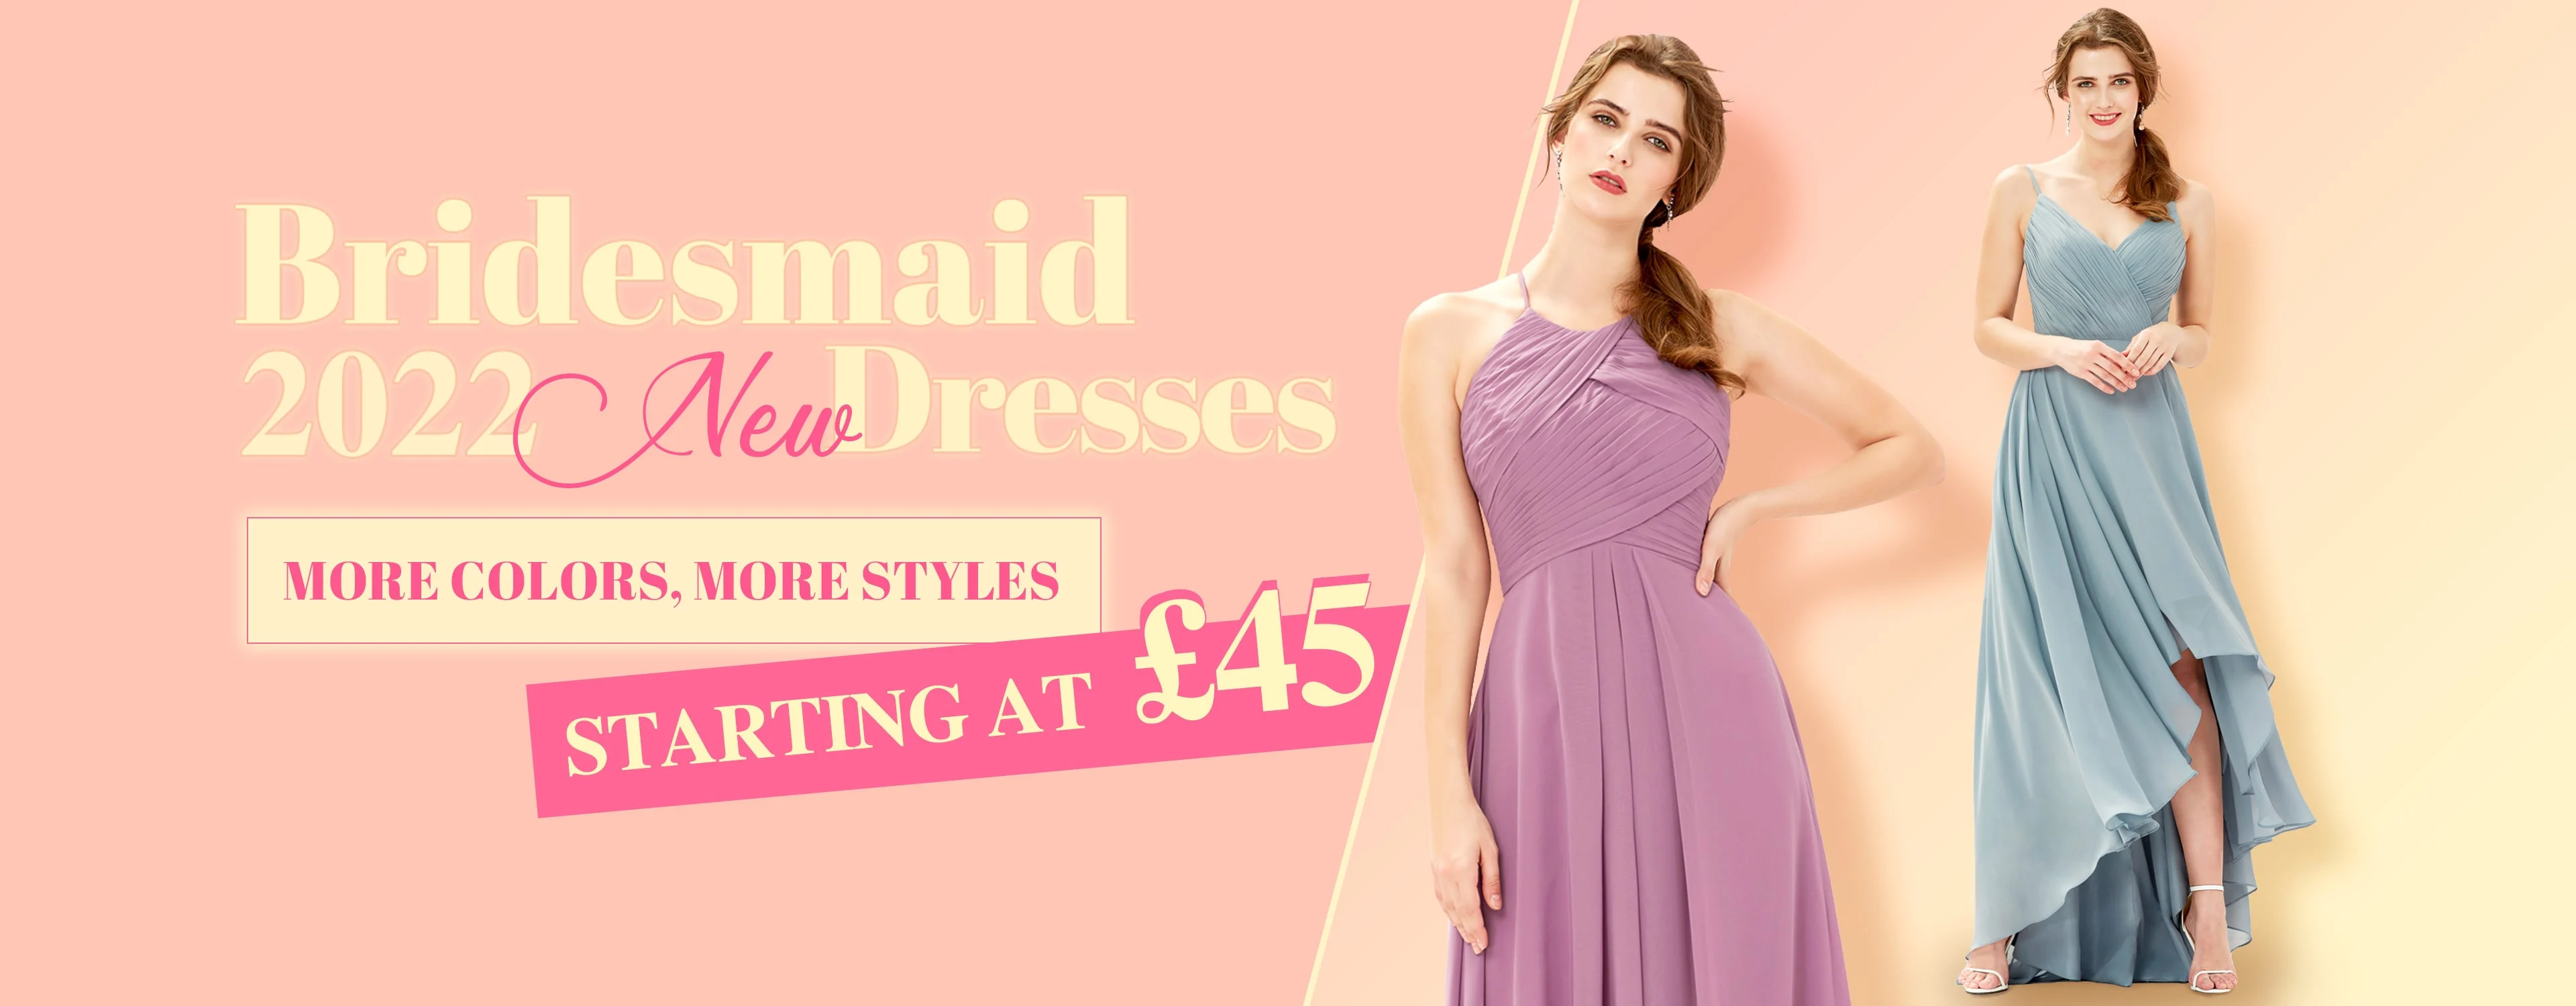 Making The Most Of Your Wedding Wardrobe: 5 Ways To Re-Wear Bridesmaid Dresses